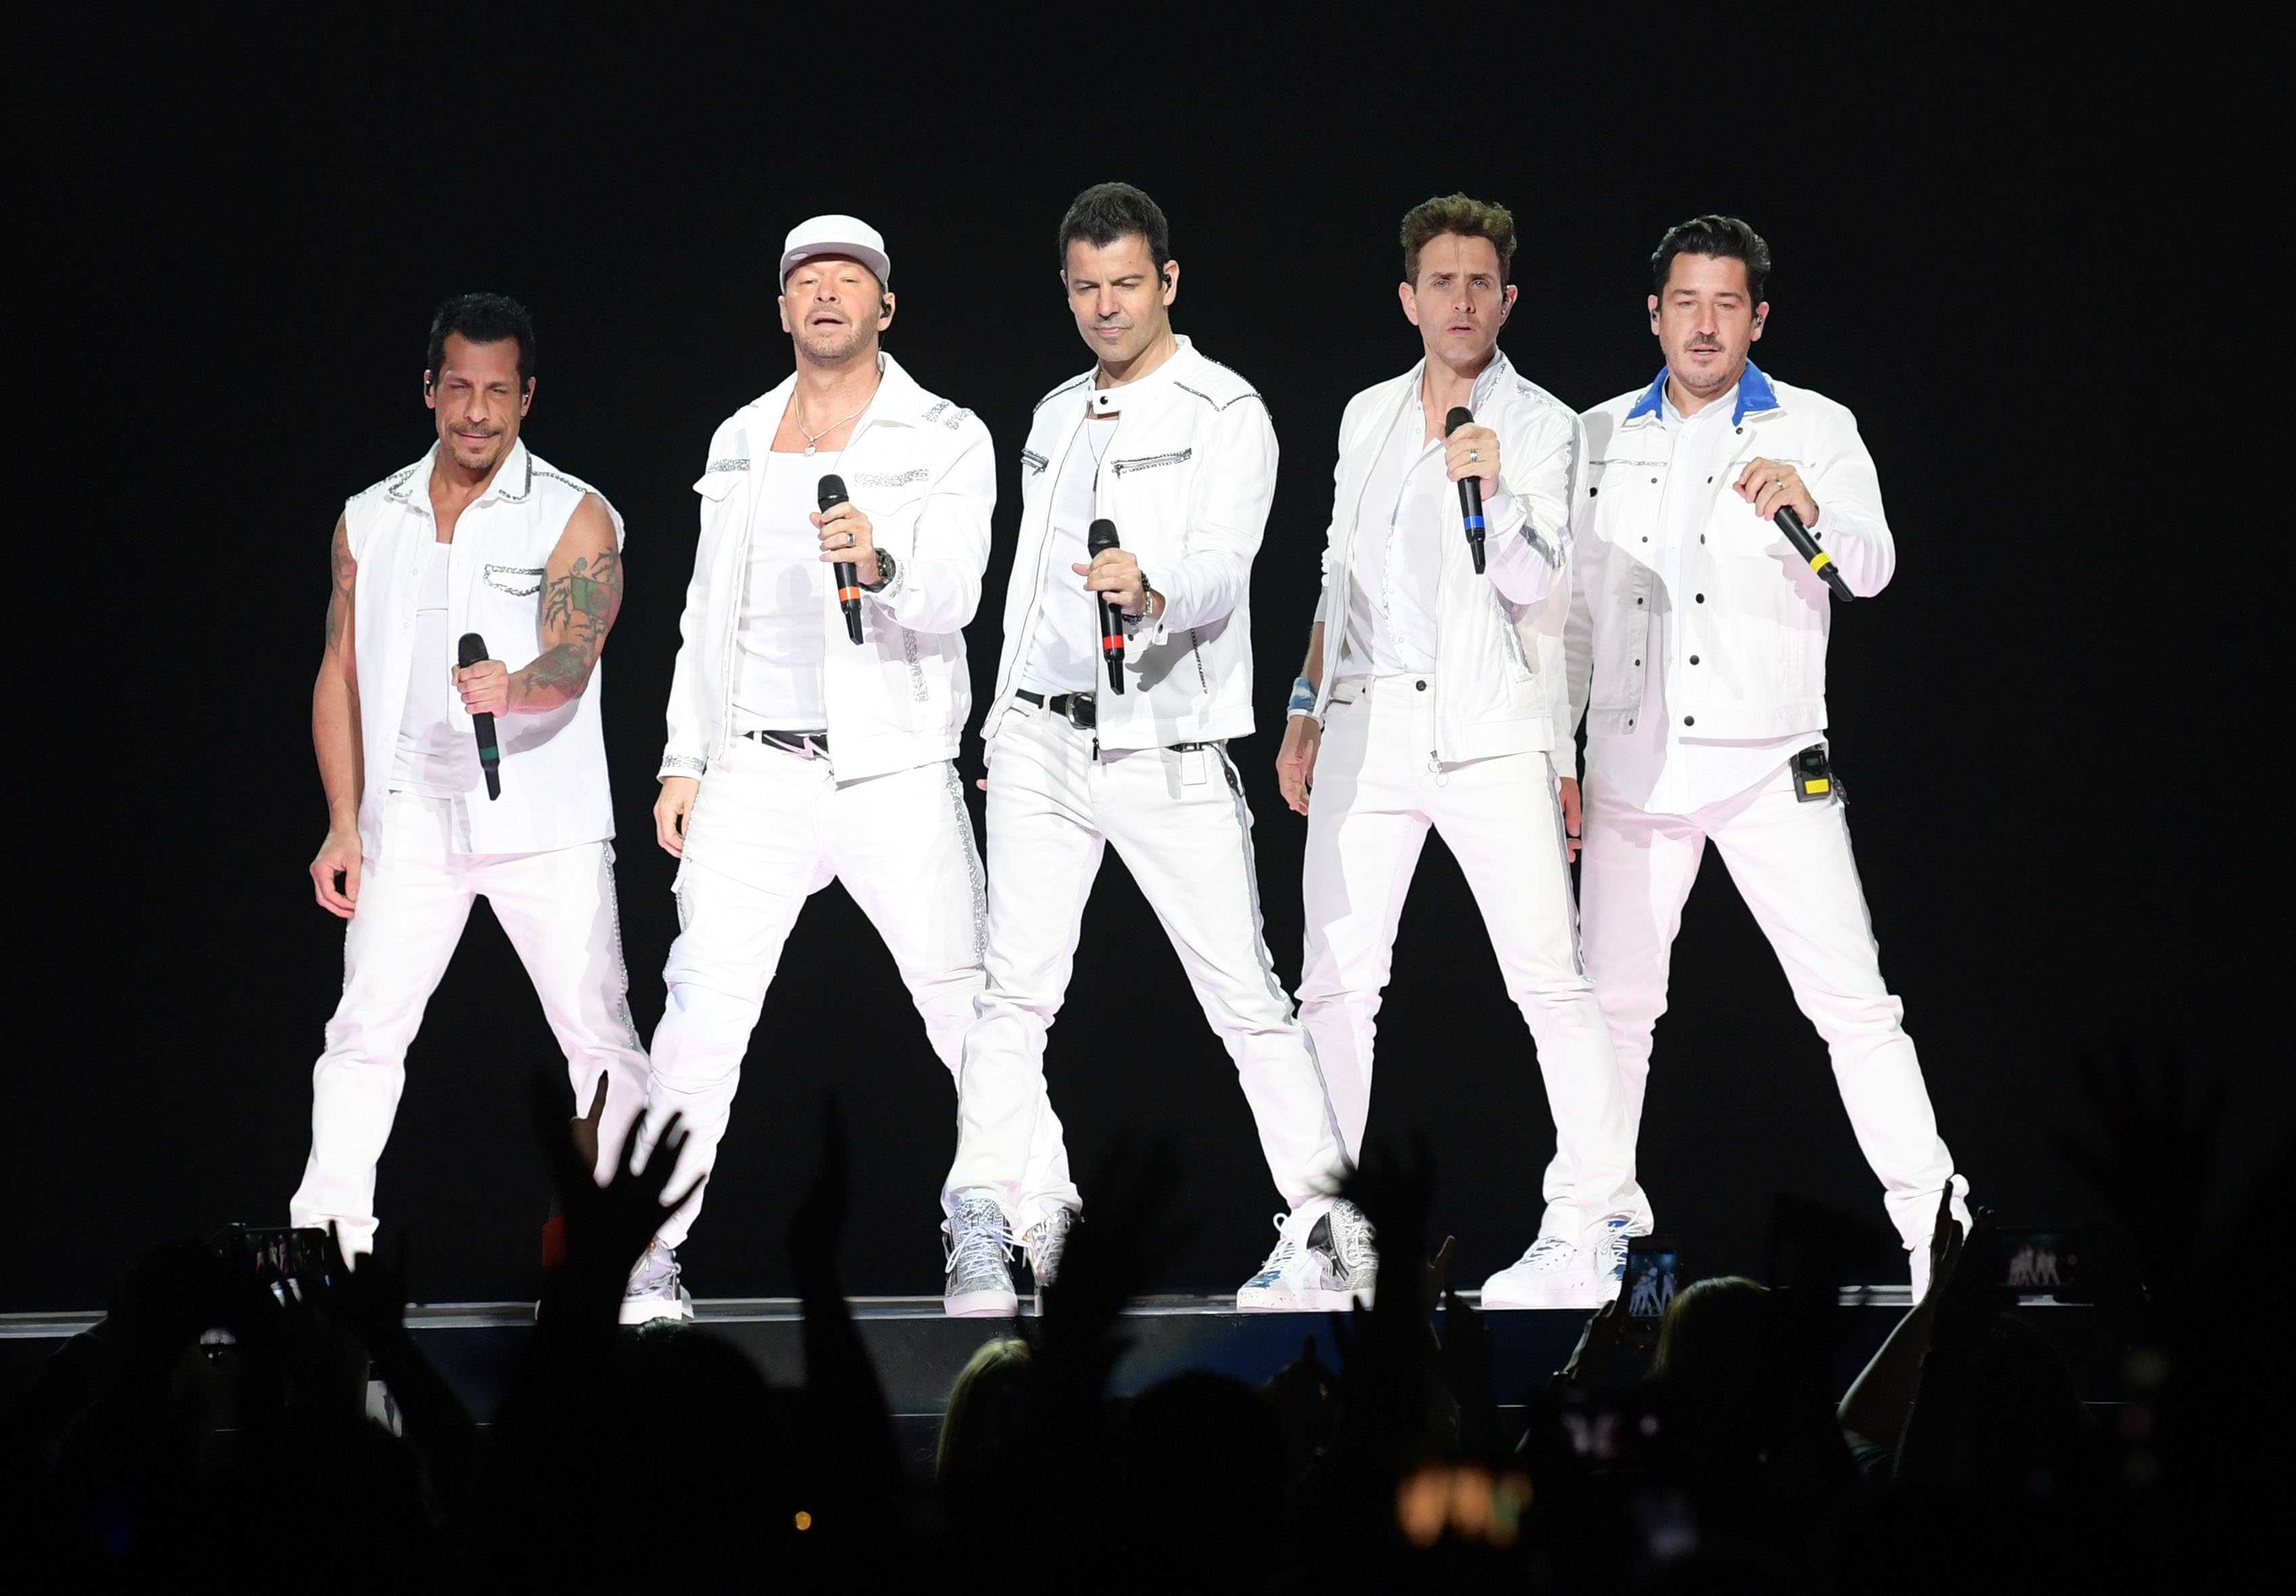 Danny Wood, Donnie Wahlberg, Jordan Knight, Joey McIntyre and Jonathan Knight of the musical group New Kids On The Block perform at Bridgestone Arena on May 09, 2019, in Nashville, Tennessee. | Source: Getty Images.